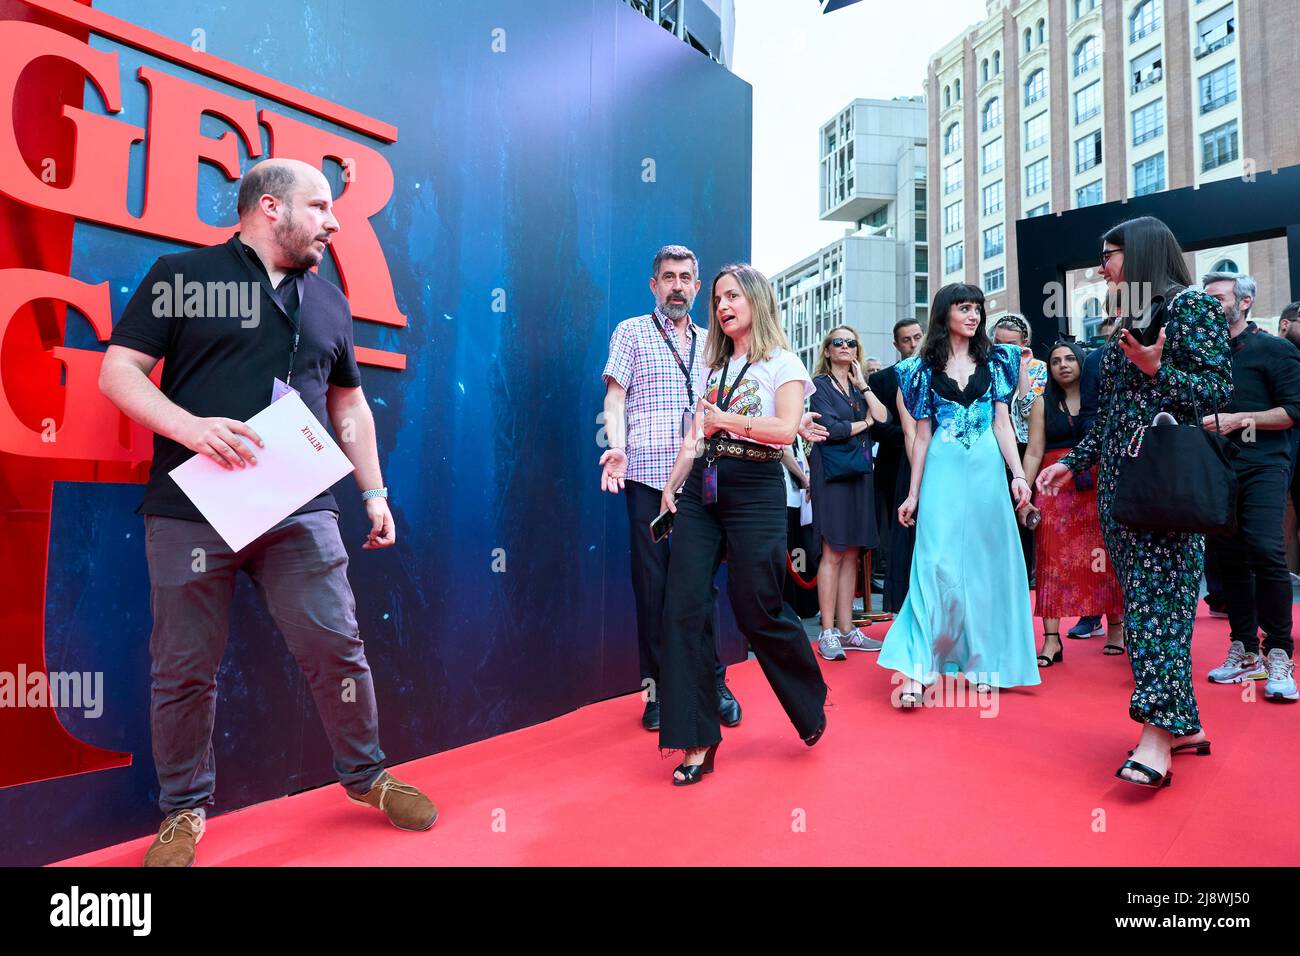 Madrid. Spain. 20220518,  Natalia Dyer attends ‘Stranger Things’ Season 4 Premiere at Callao Cinema on May 18, 2022 in Madrid, Spain Credit: MPG/Alamy Live News Stock Photo